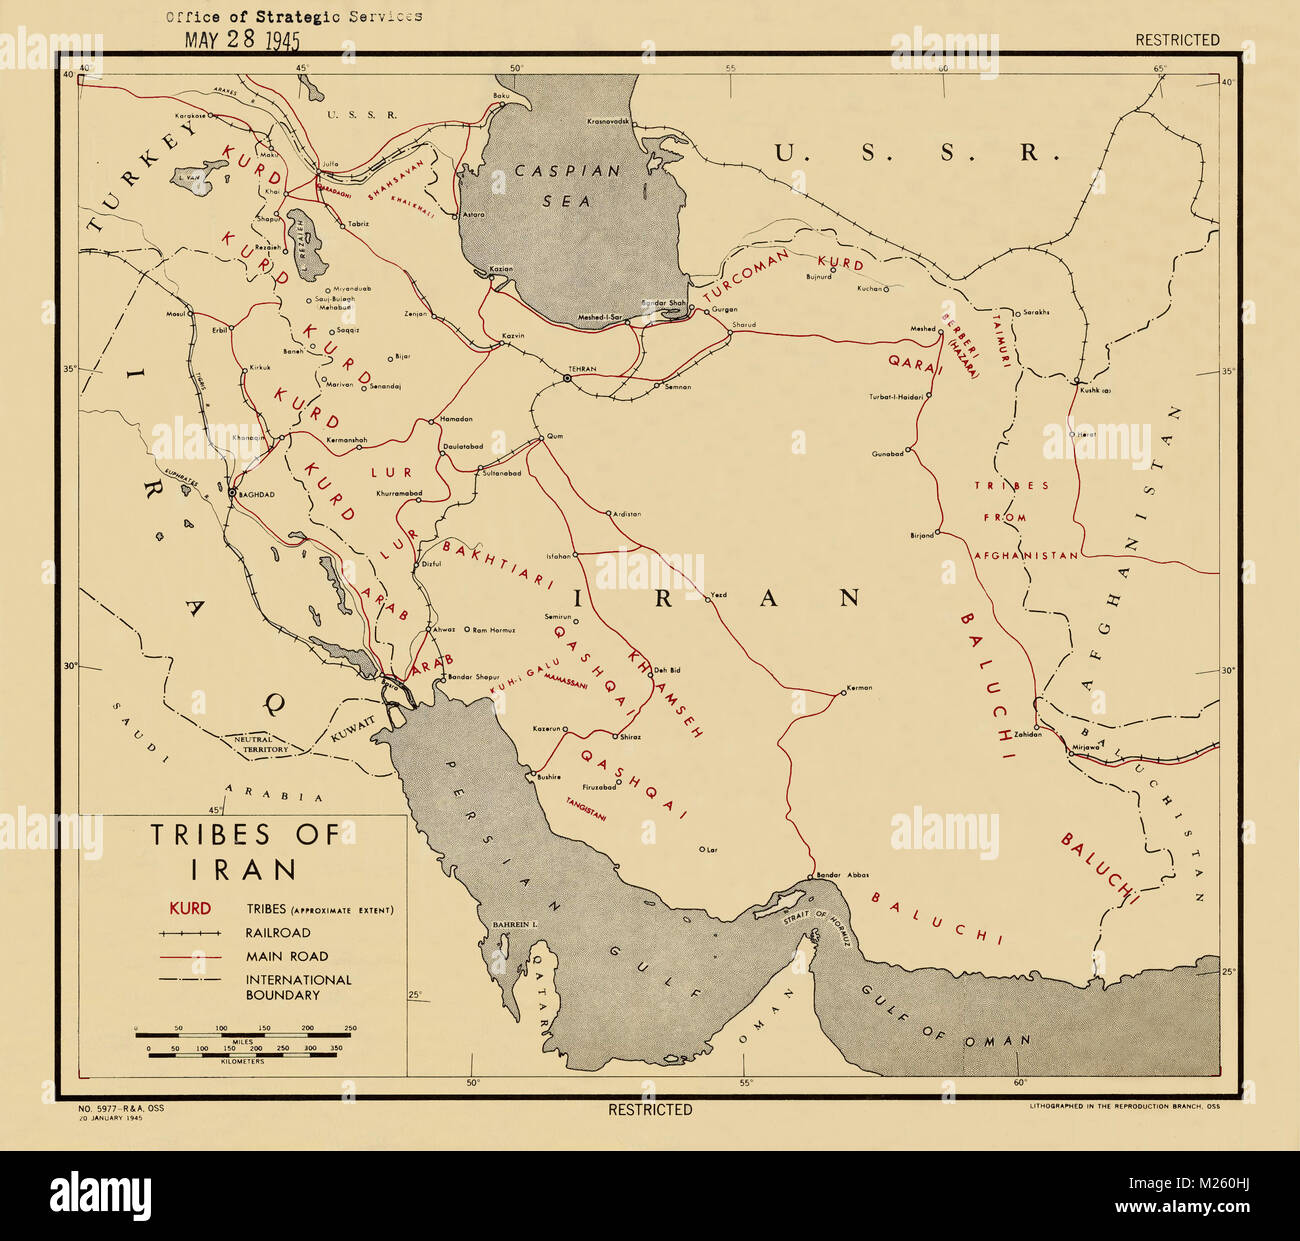 Historical map of Tribes in Iran circa 1945. Stock Photo